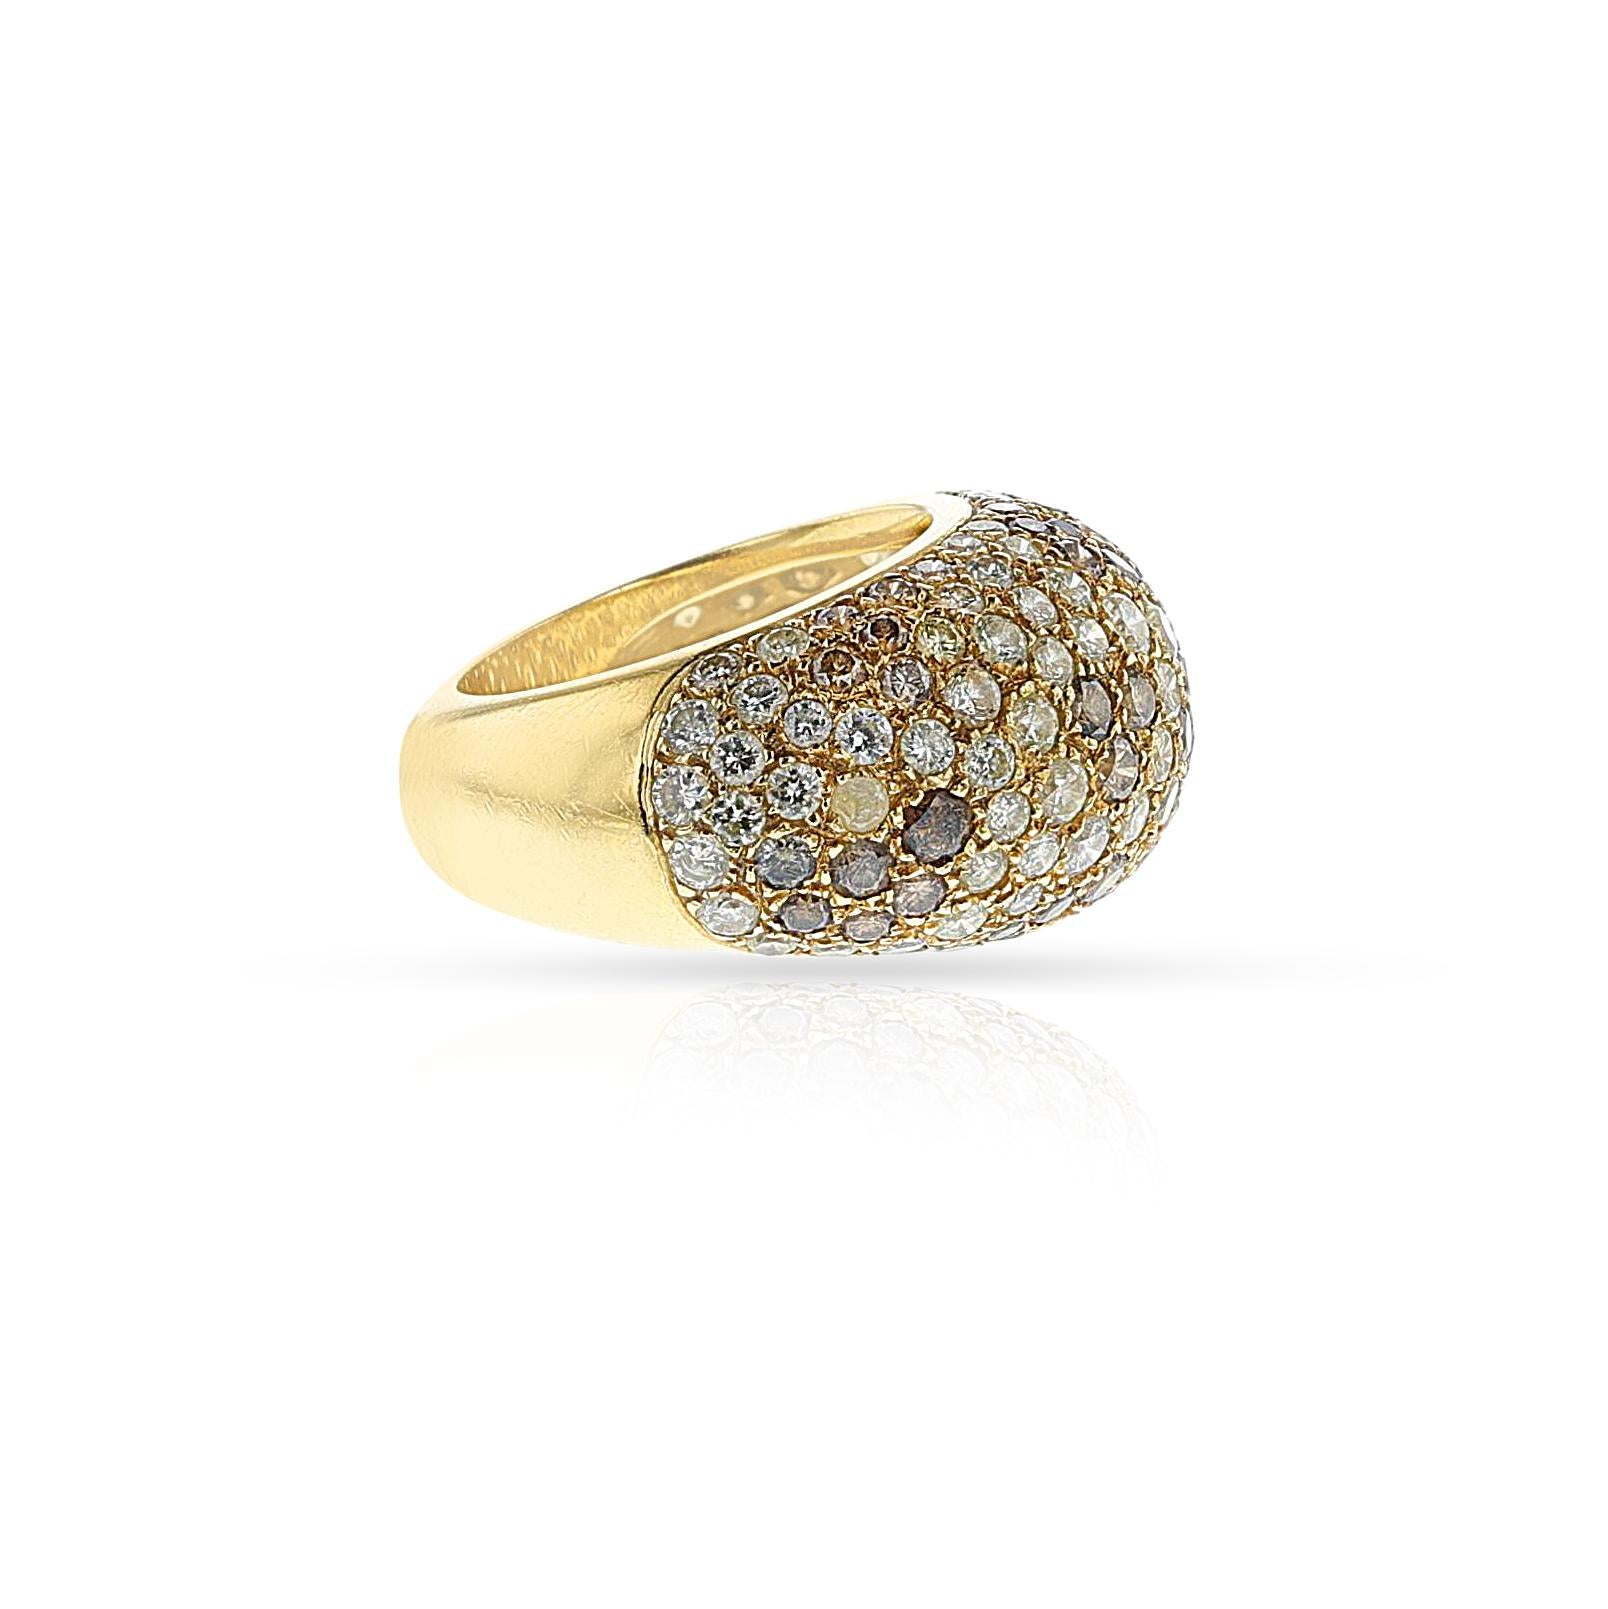 Cartier France Diamond and Colored Diamond Bombe Ring, 18k For Sale 1